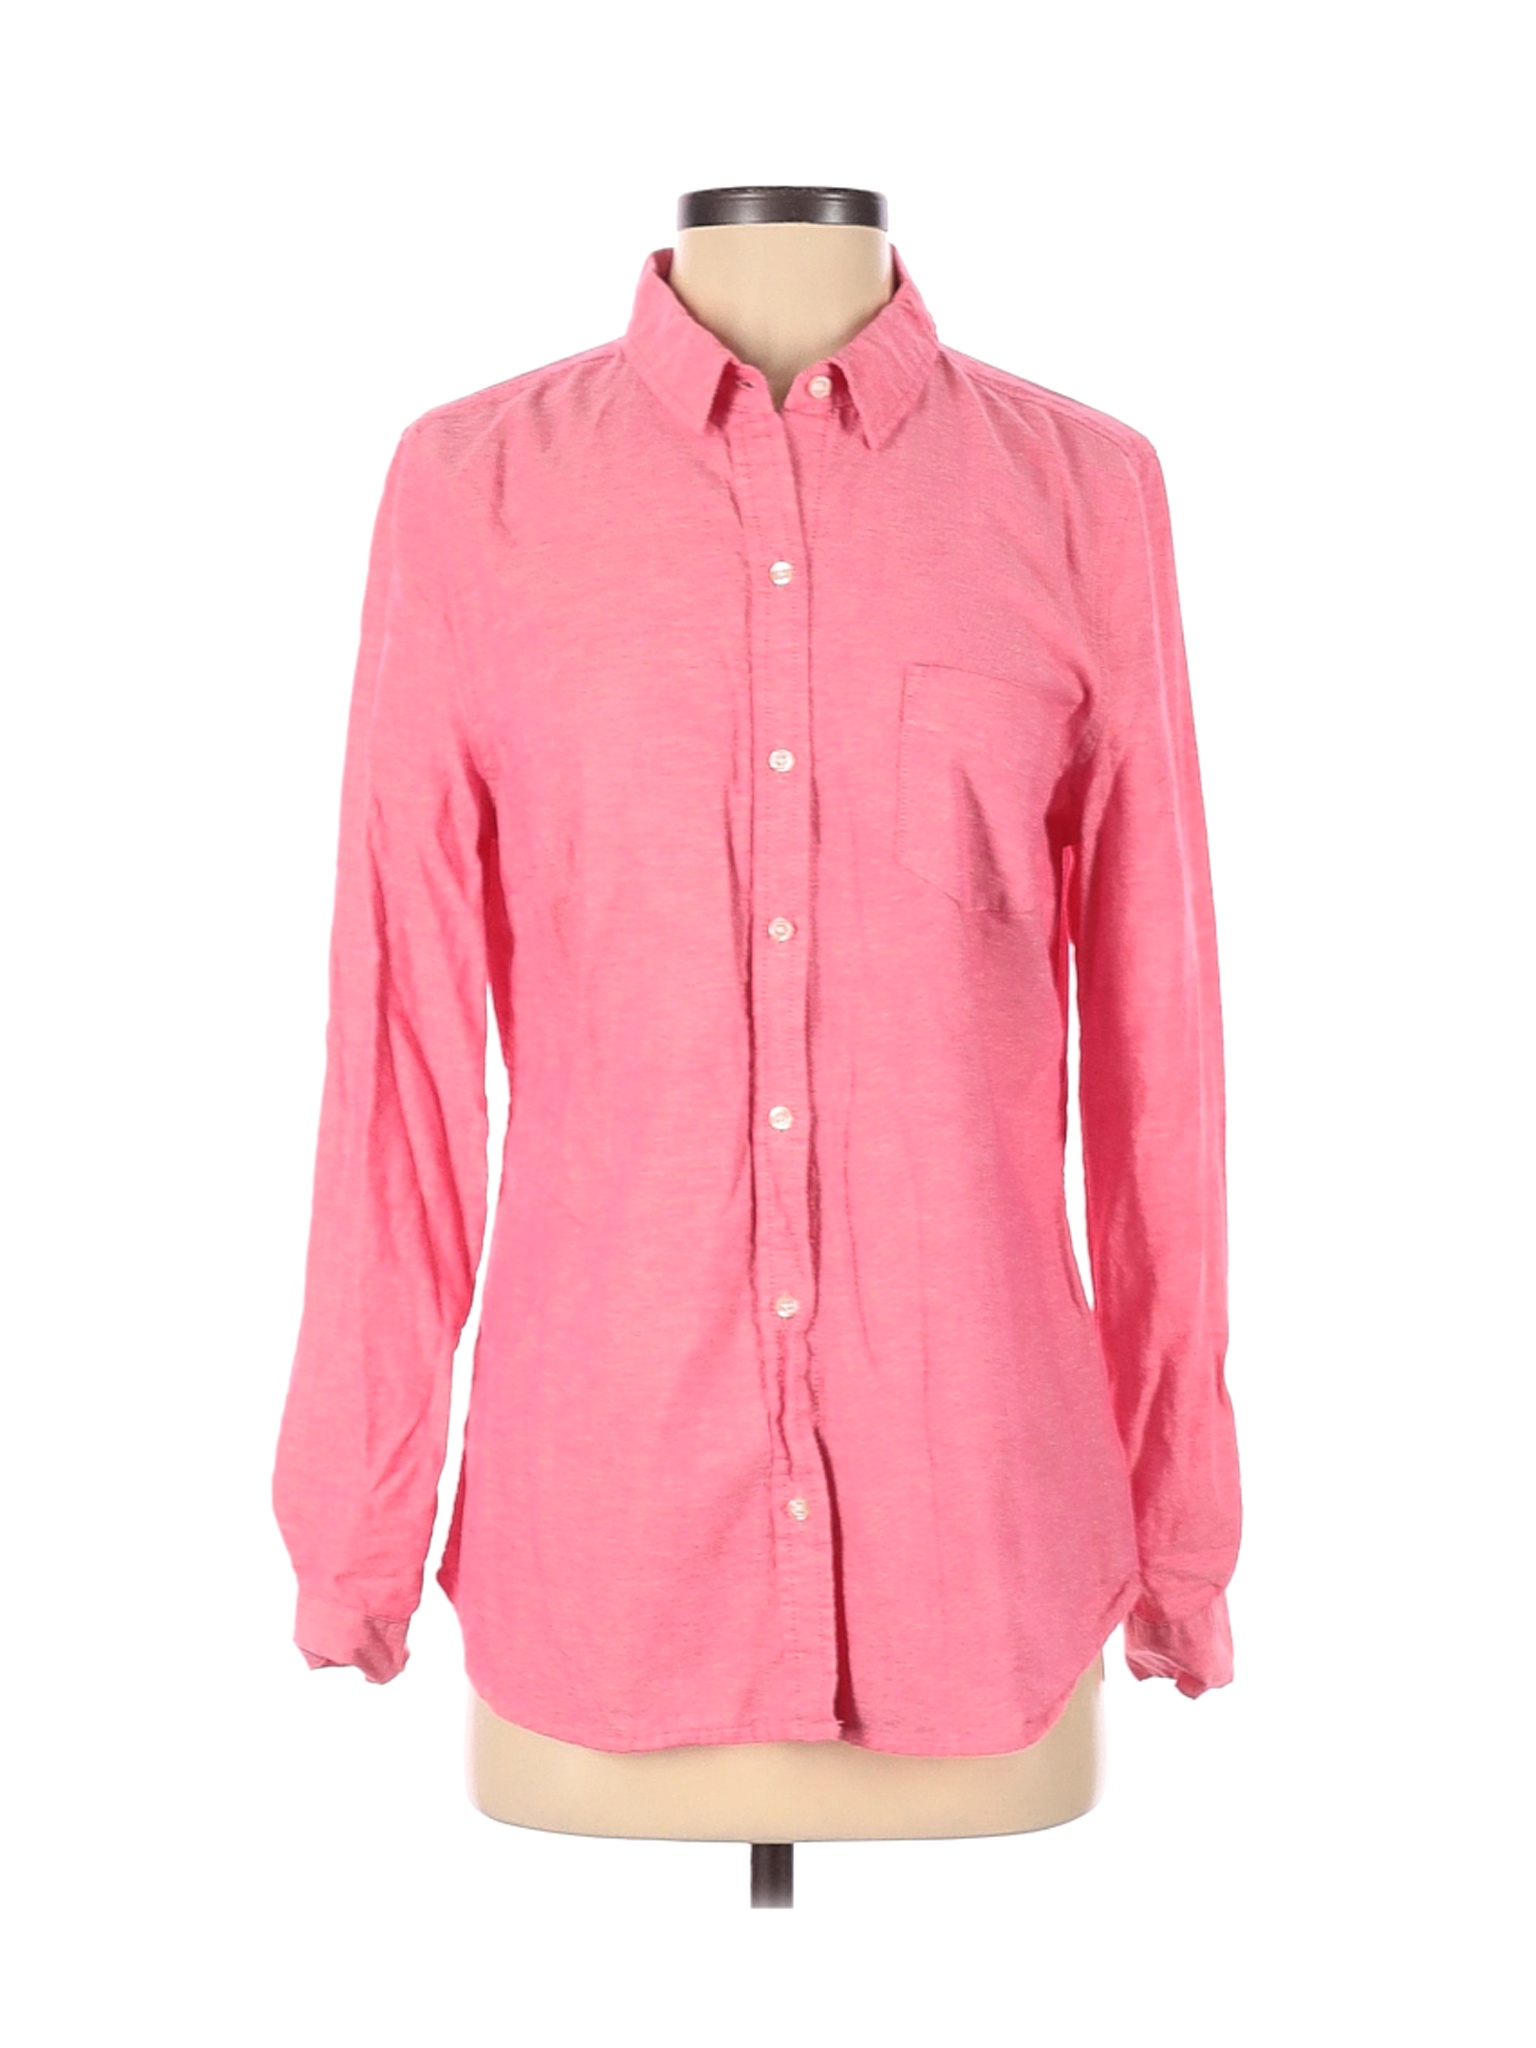 pinkish red button up shirt old navy